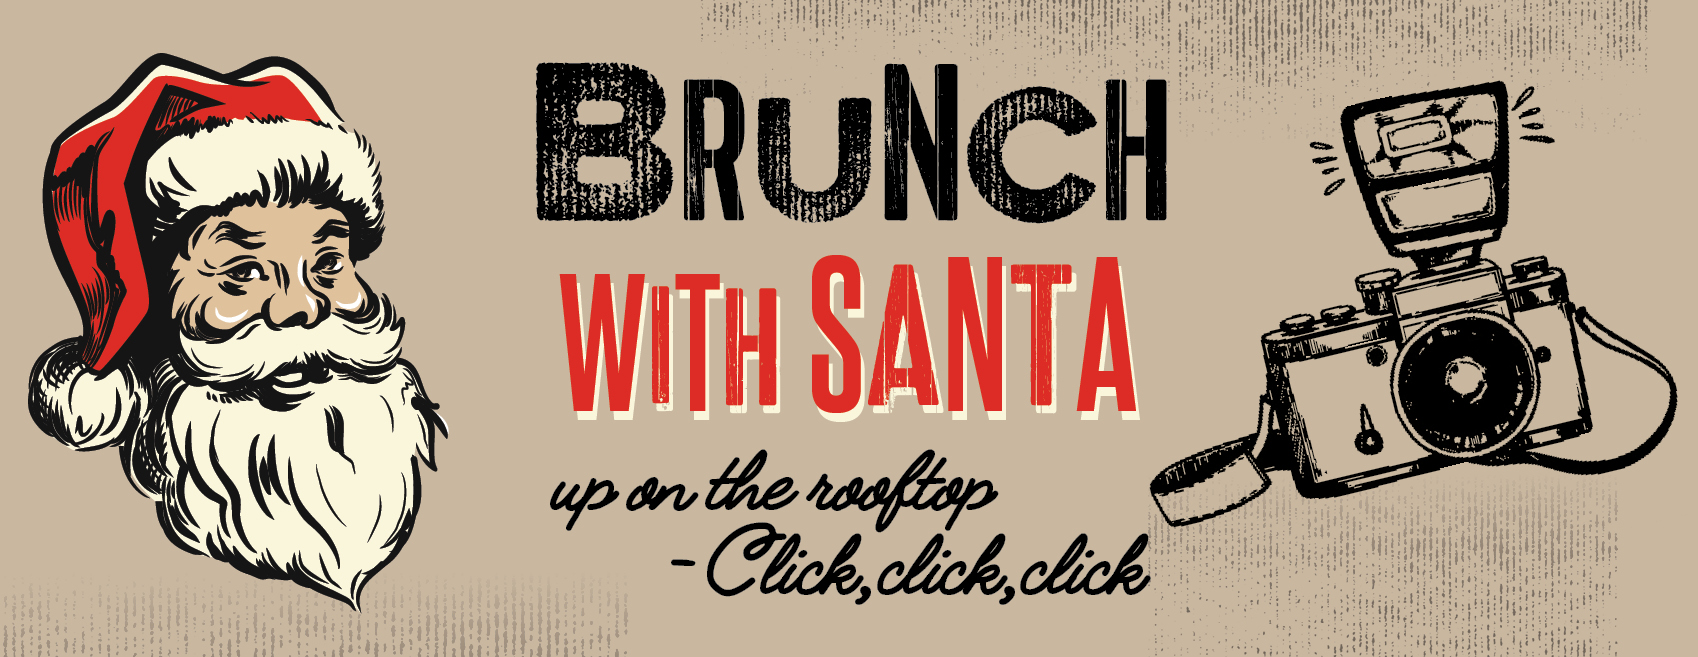 Brunch with Santa at UP on the Roof